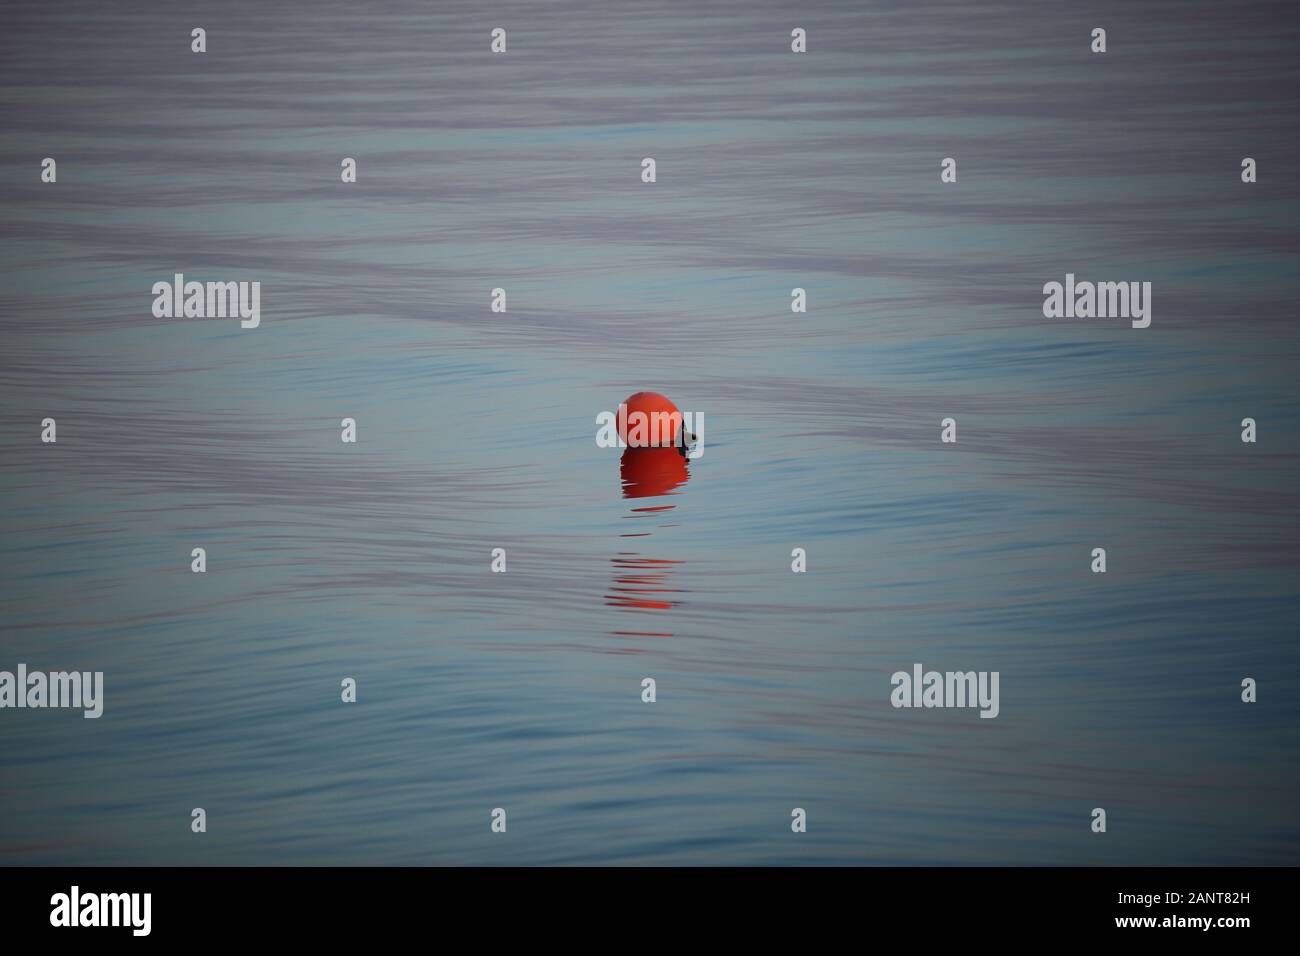 Red buoy in middle of sea / ocean / lake, reflections in water, nobody, oneiric calm silent atmosphere. Stock Photo